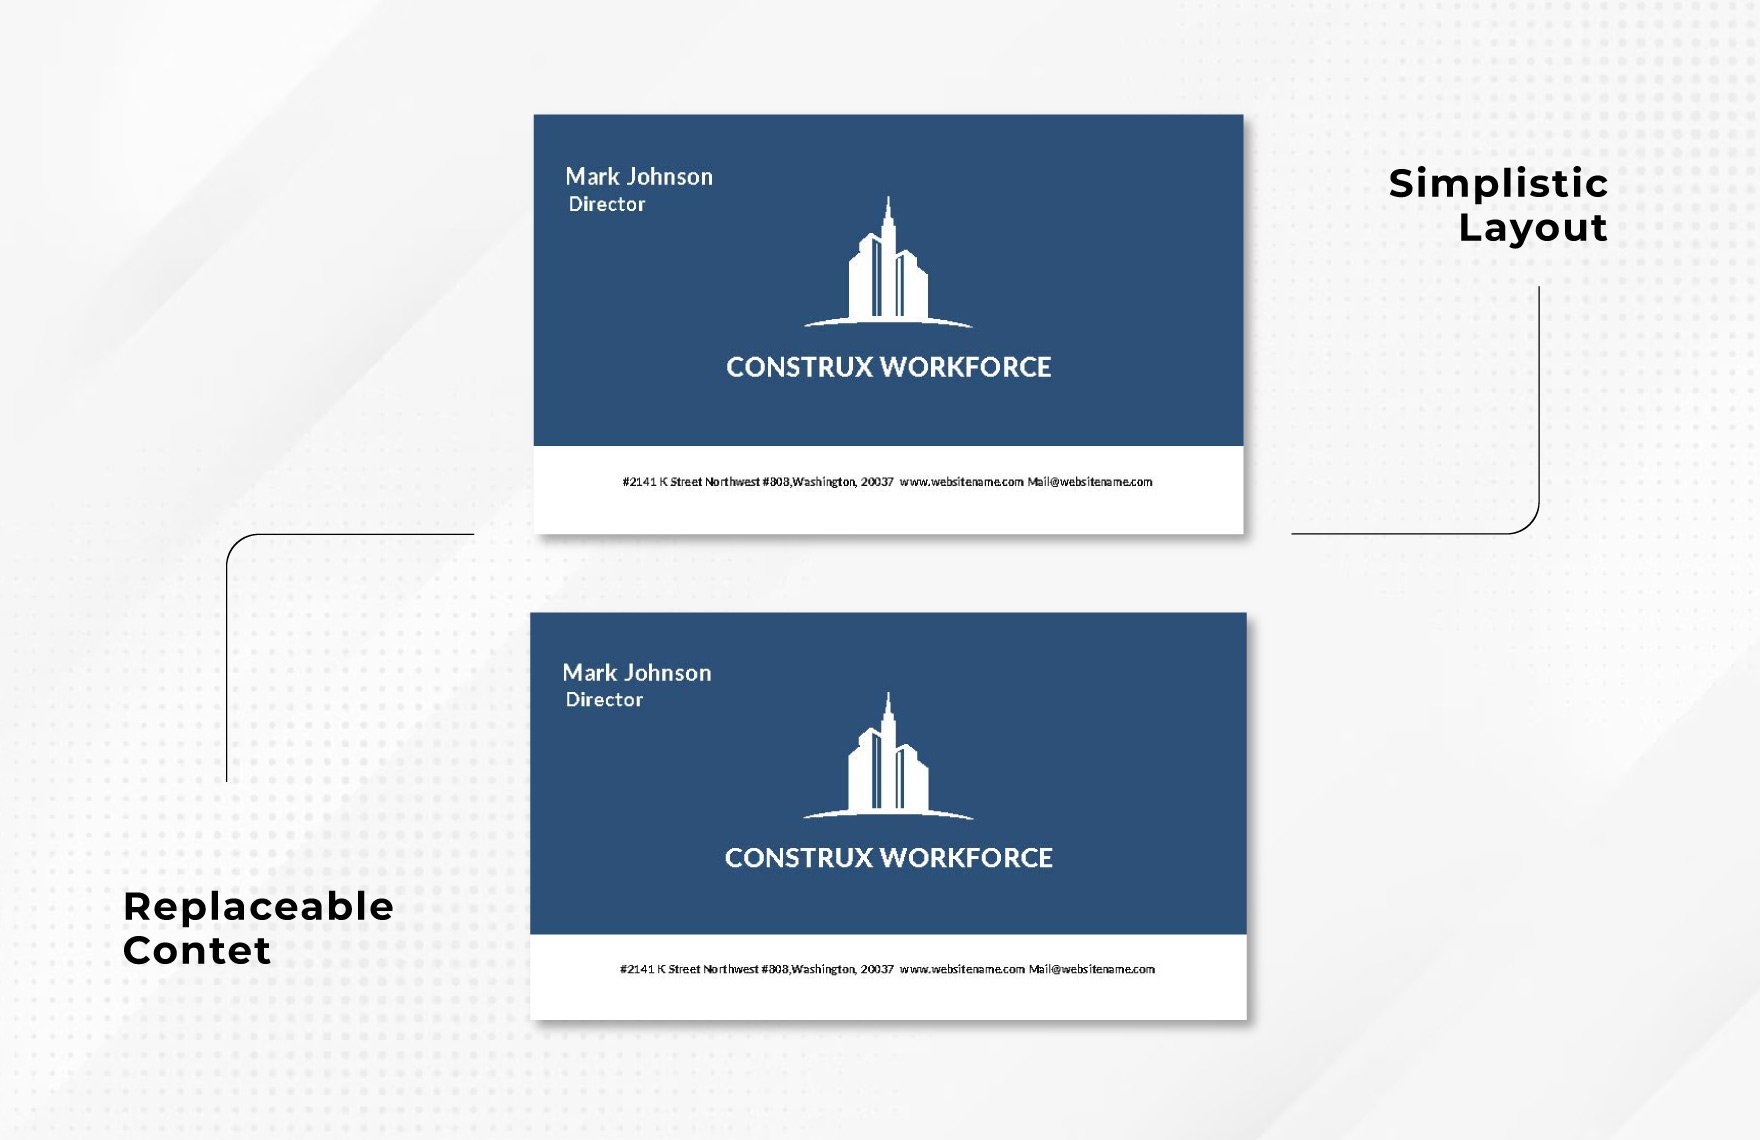 Architecture Business Card Template